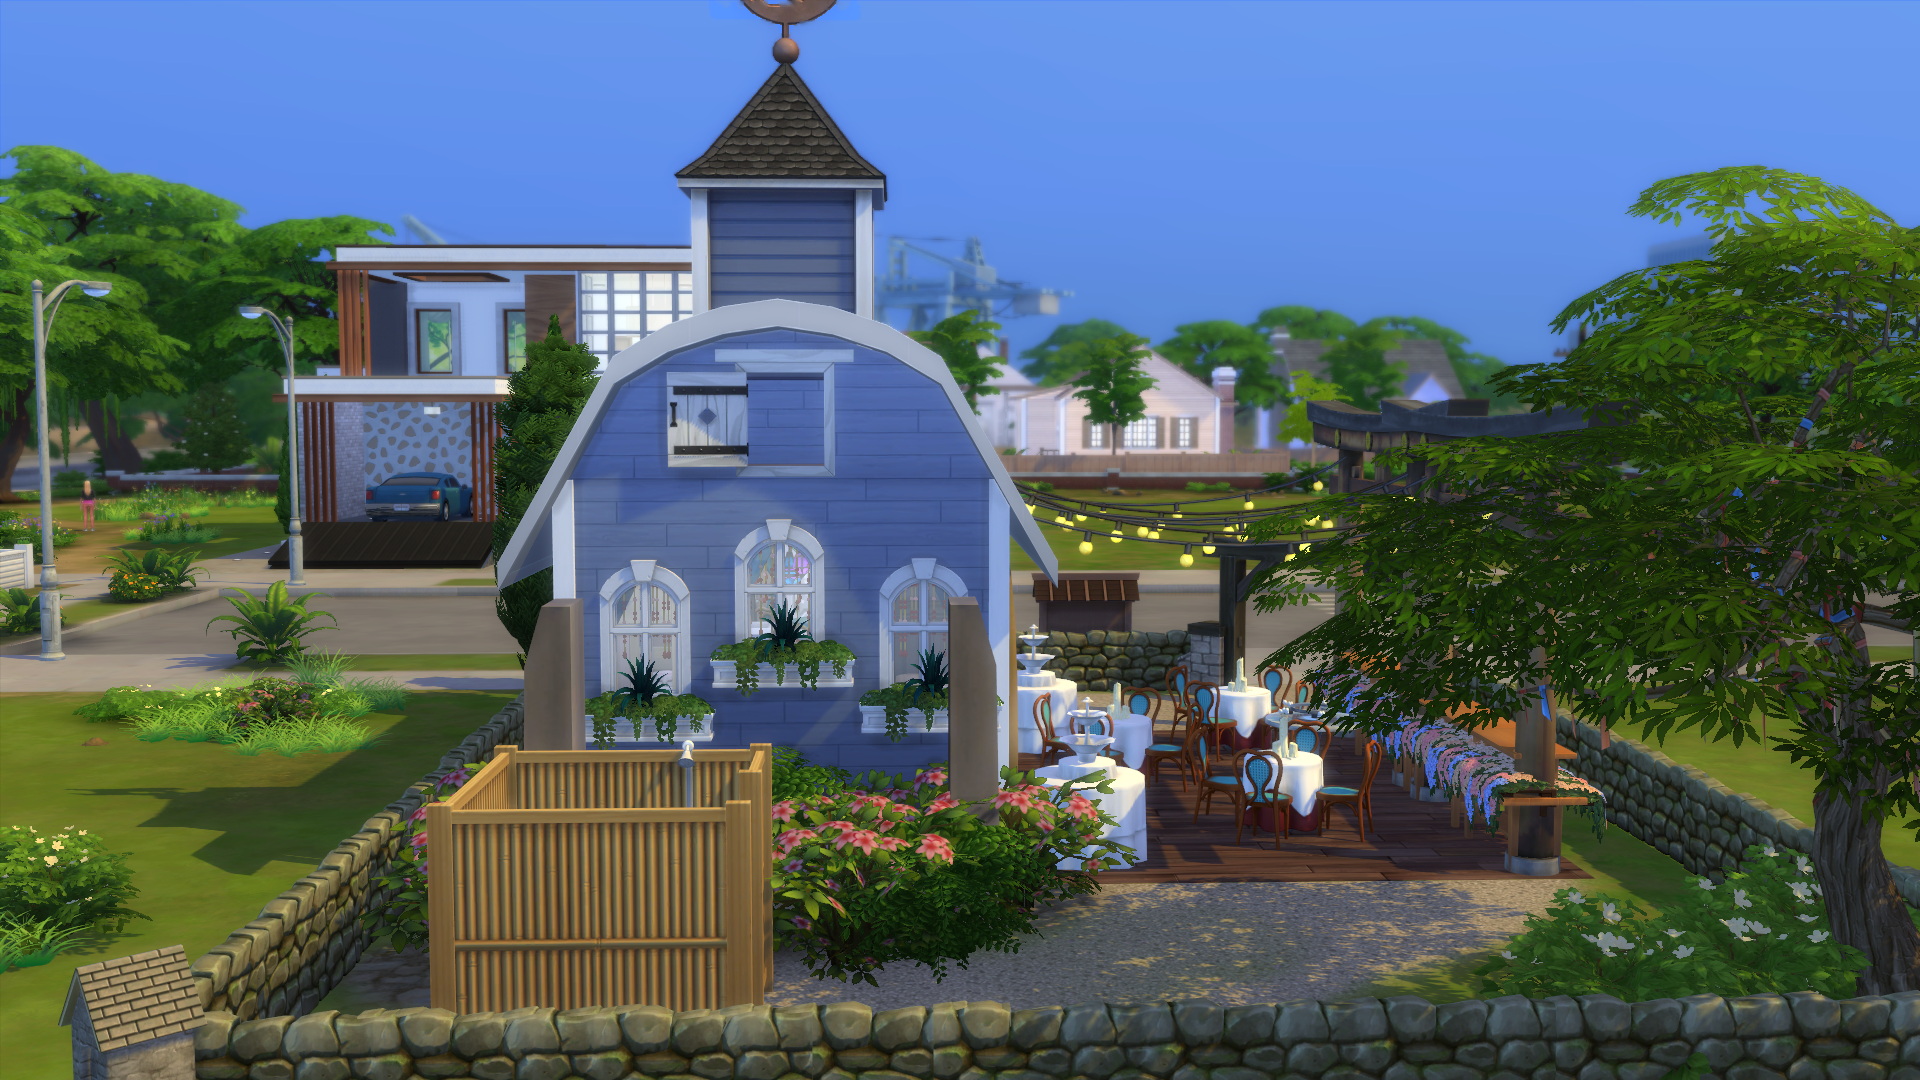 sims 4 20x15 house download